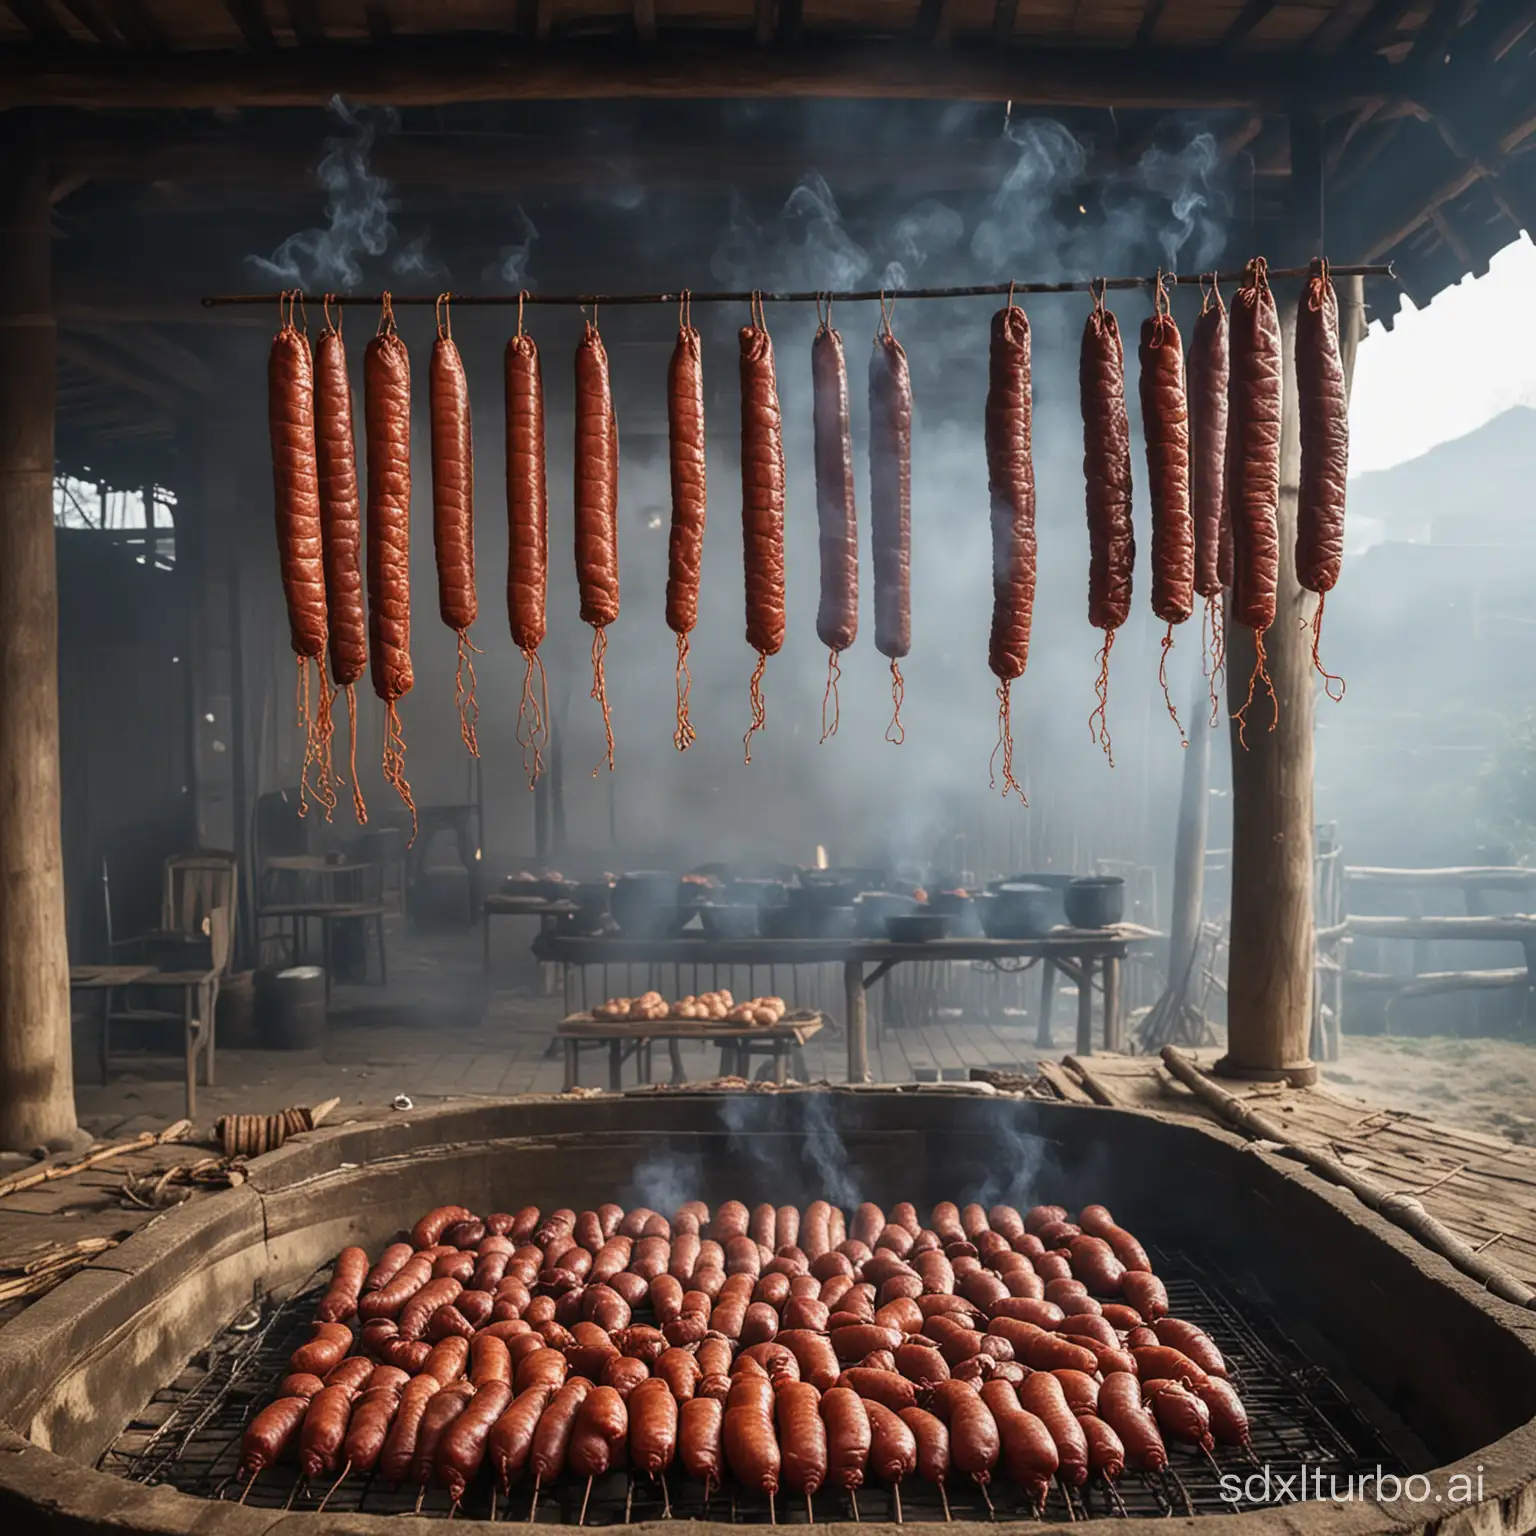 Traditional smoked sausage venue in rural China